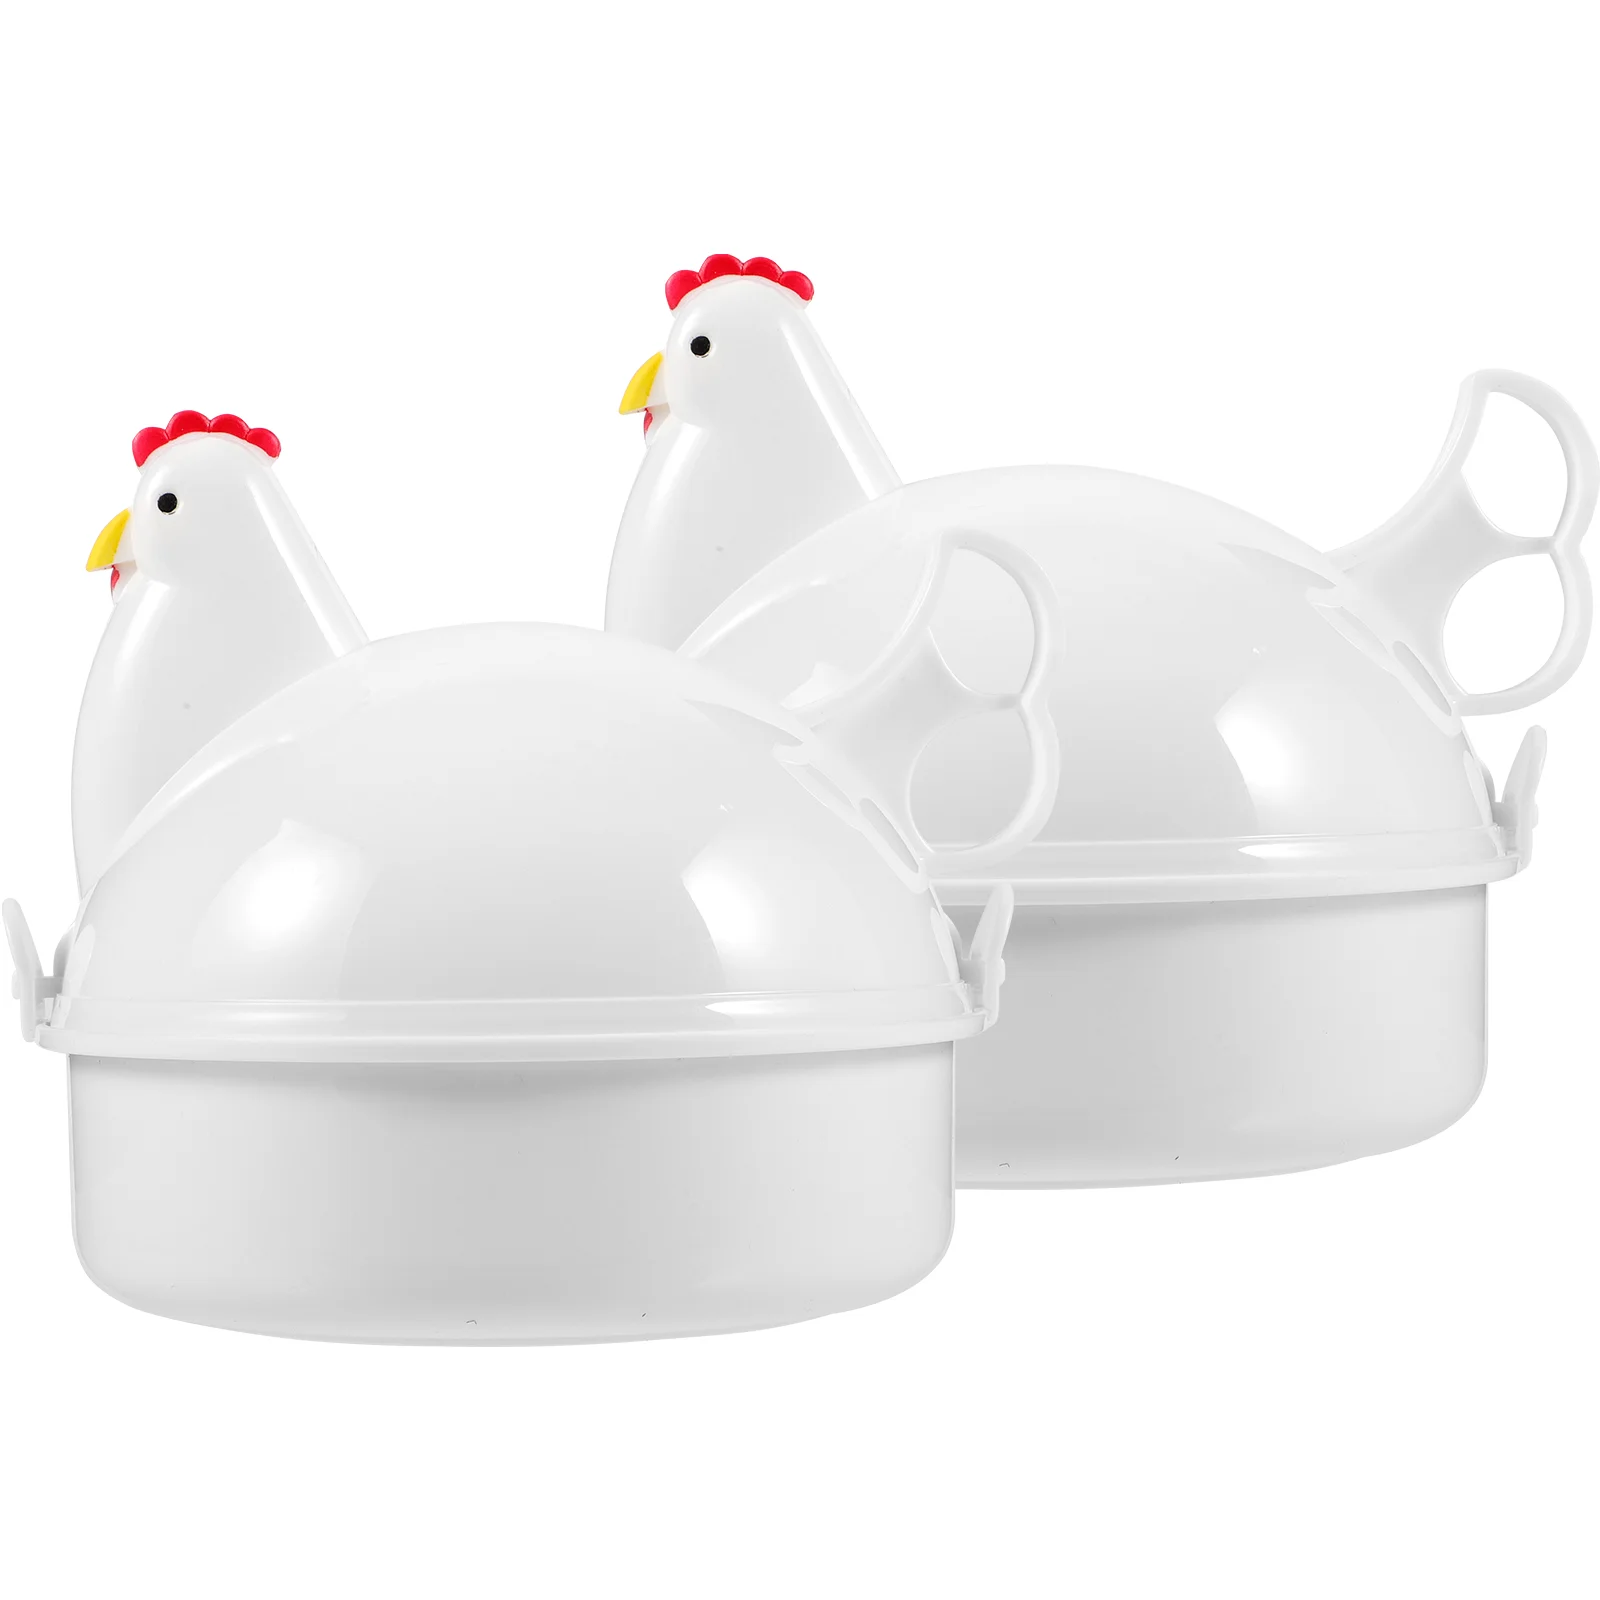 

2 Pcs Egg Steamer Convenient Plastic Cooker Baby Food Container Household Microwave Containers Reusable Maker Boiler